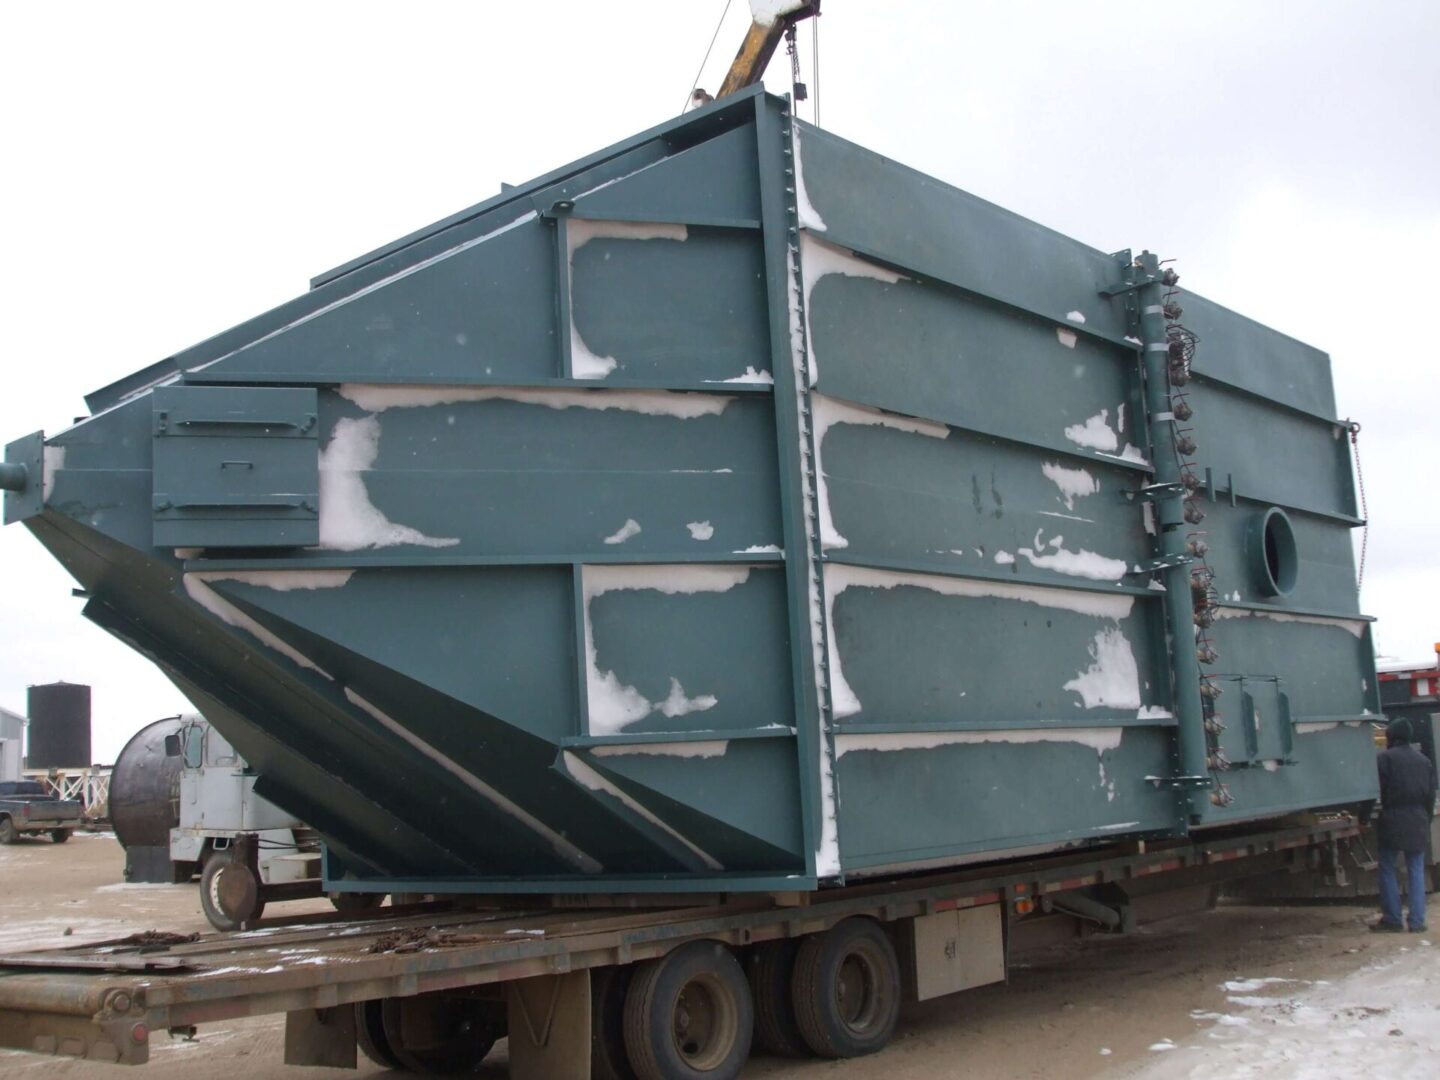 A large green container on a flatbed truck.